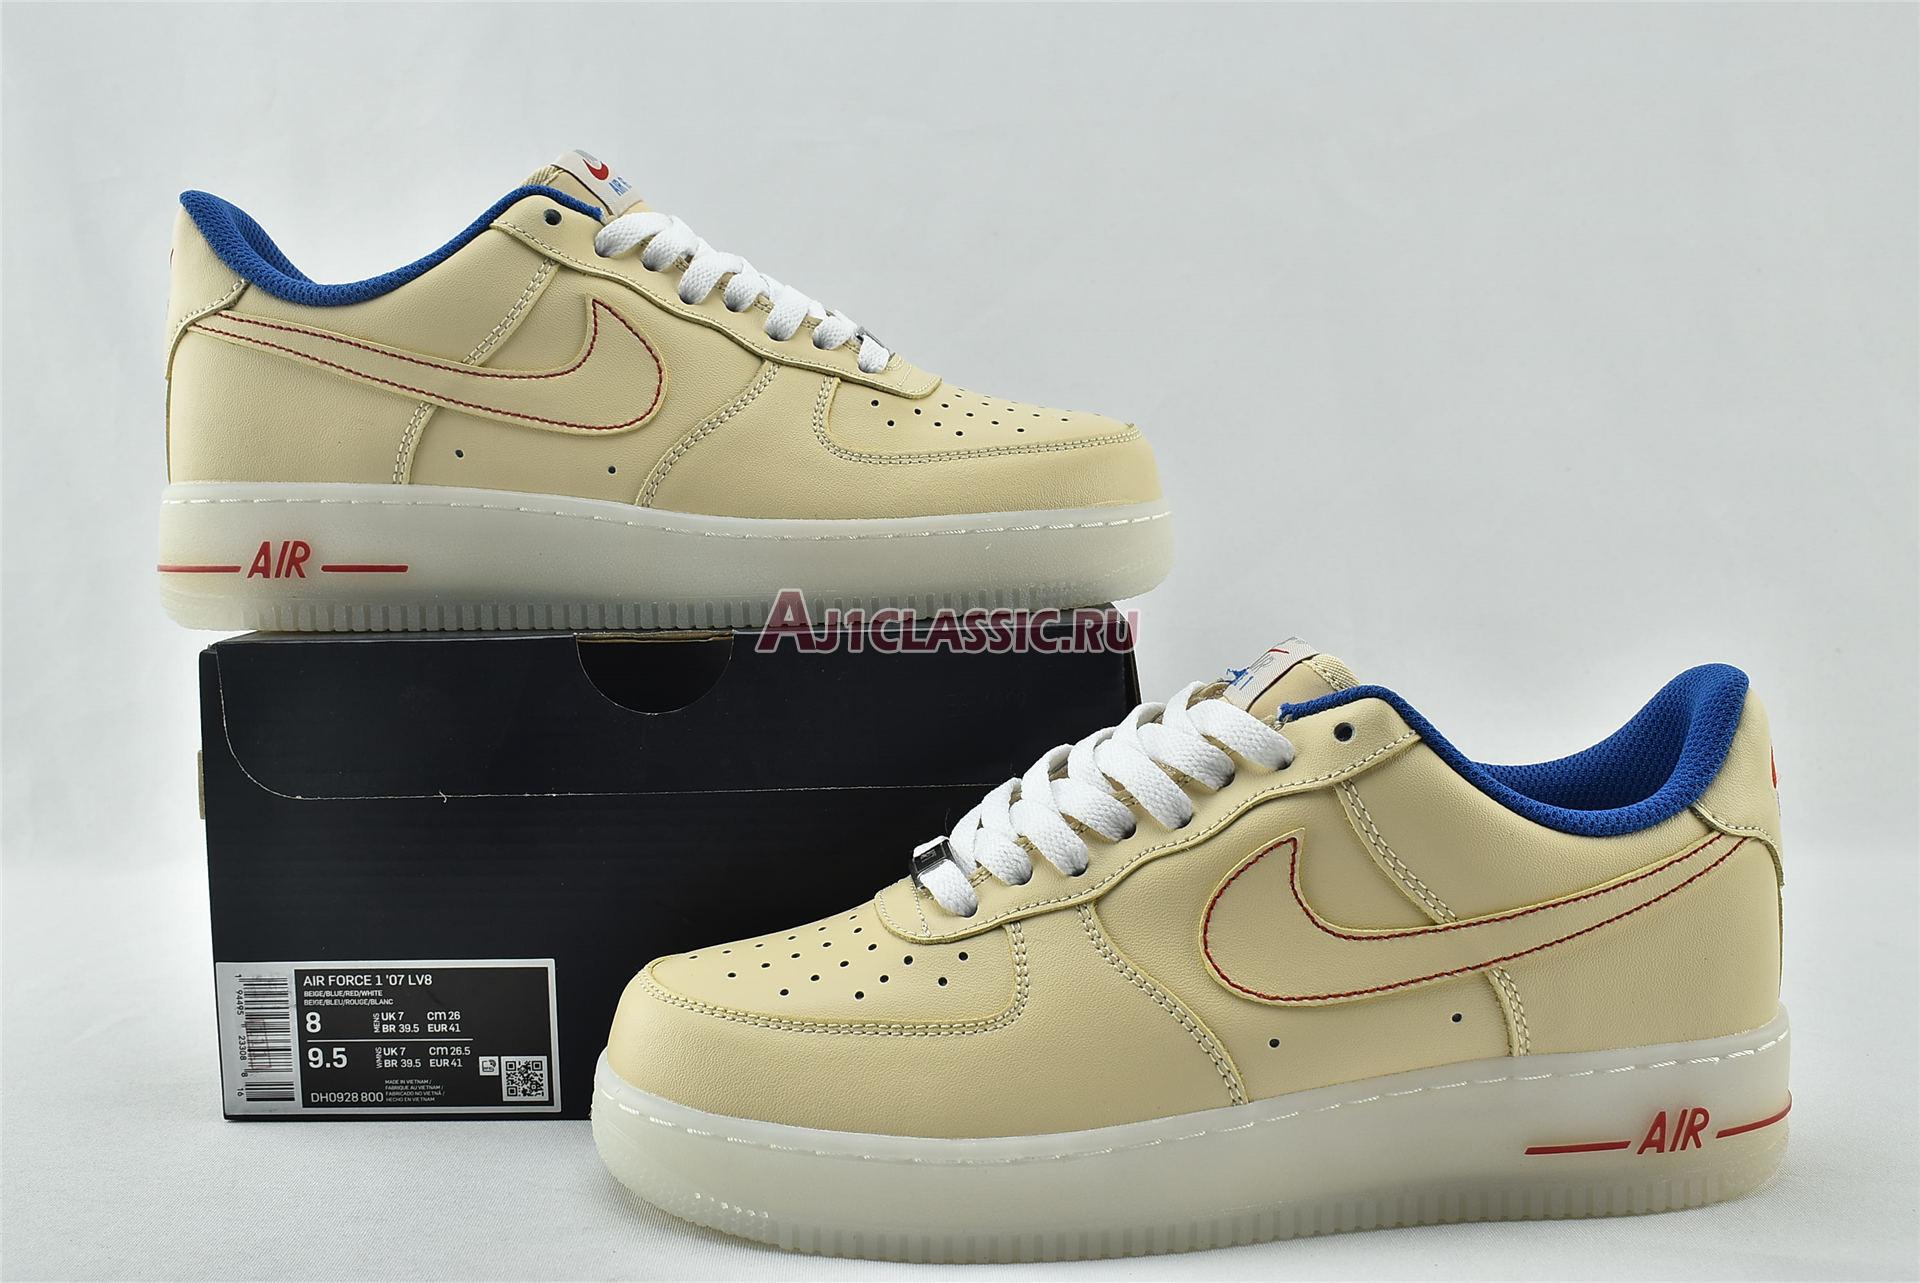 Nike Air Force 1 Low 07 LV8 "Ice Sole" DH0928-800